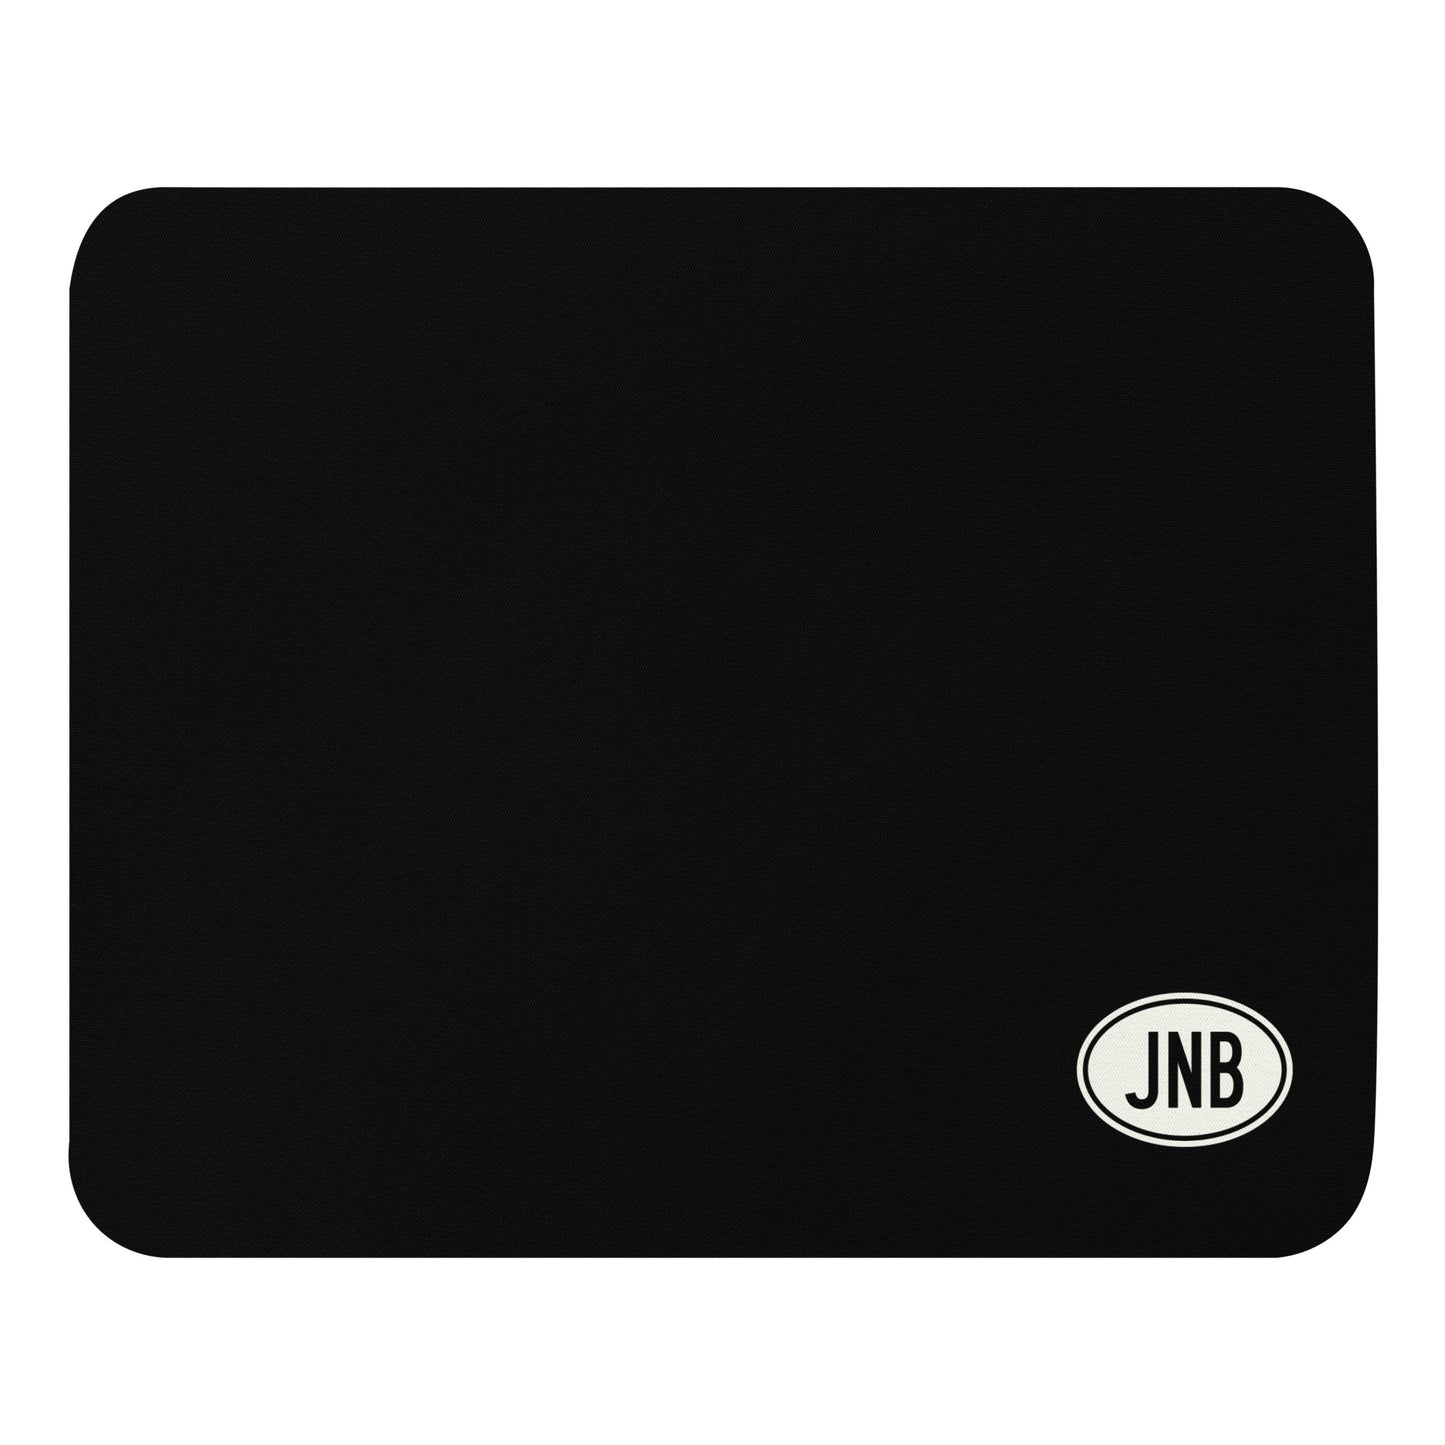 Unique Travel Gift Mouse Pad - White Oval • JNB Johannesburg • YHM Designs - Image 01